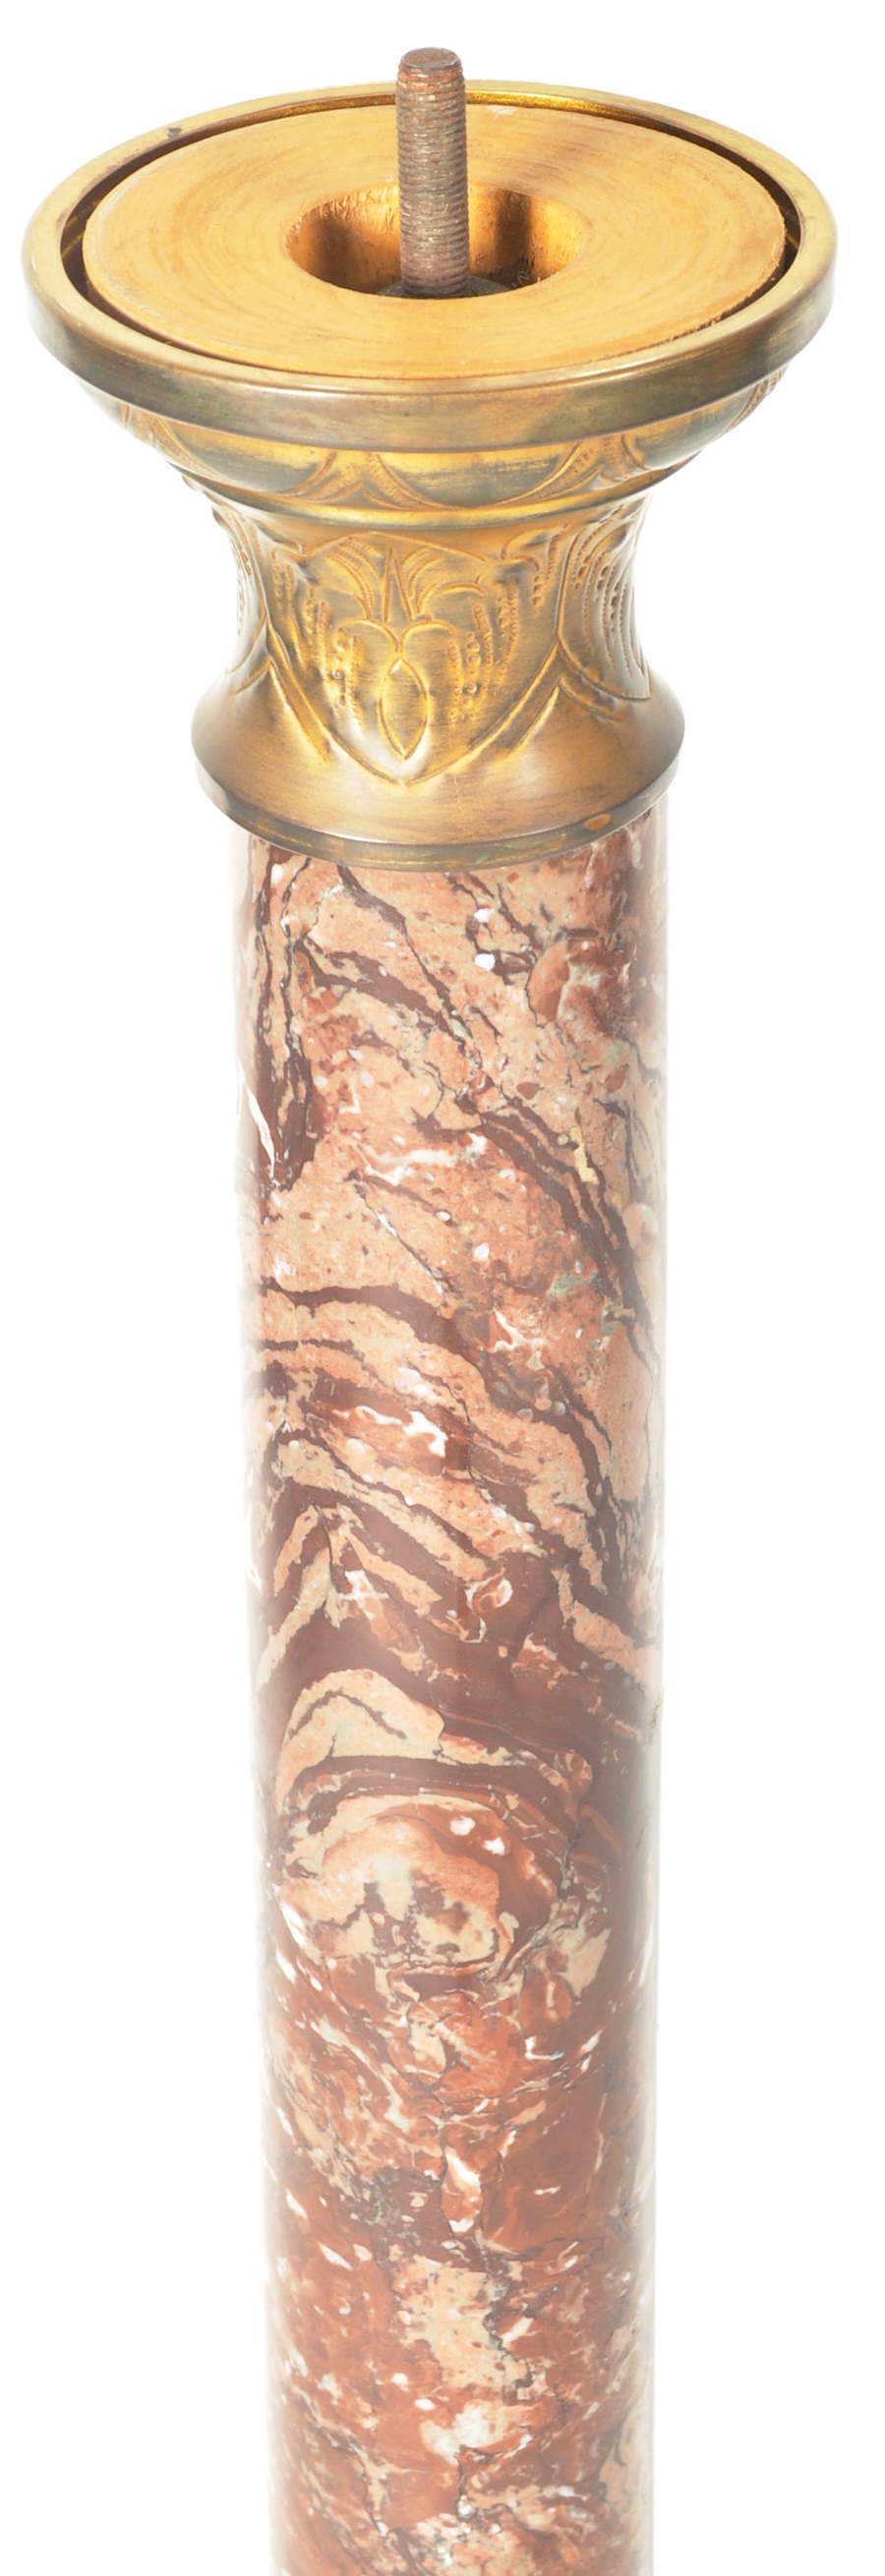 19TH CENTURY VICTORIAN MOTTLED RED AND GREY MARBLE JARDINIERE - Image 7 of 7